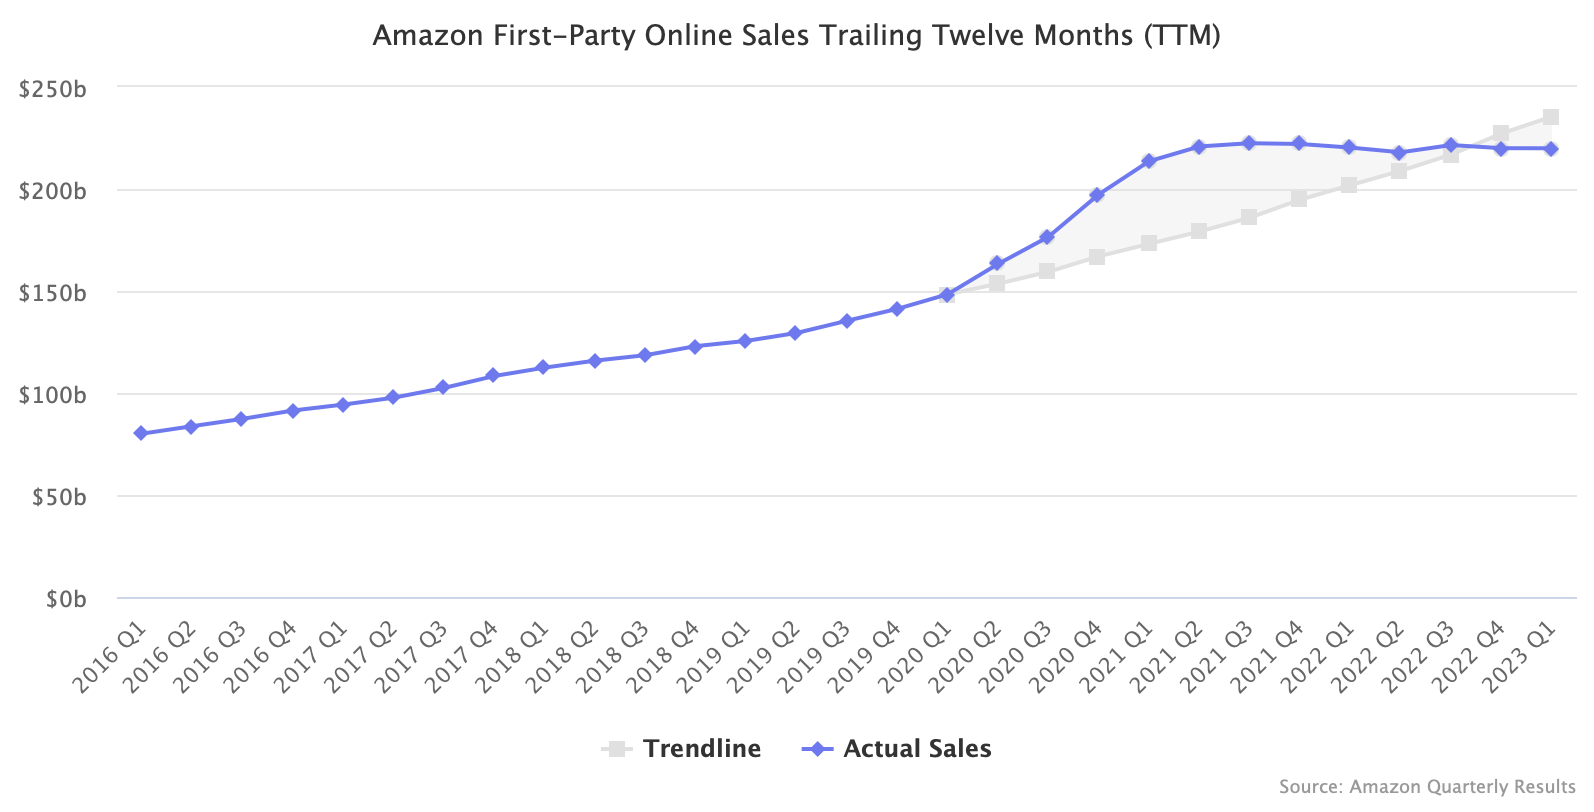 Amazon First-Party Online Sales Trailing Twelve Months